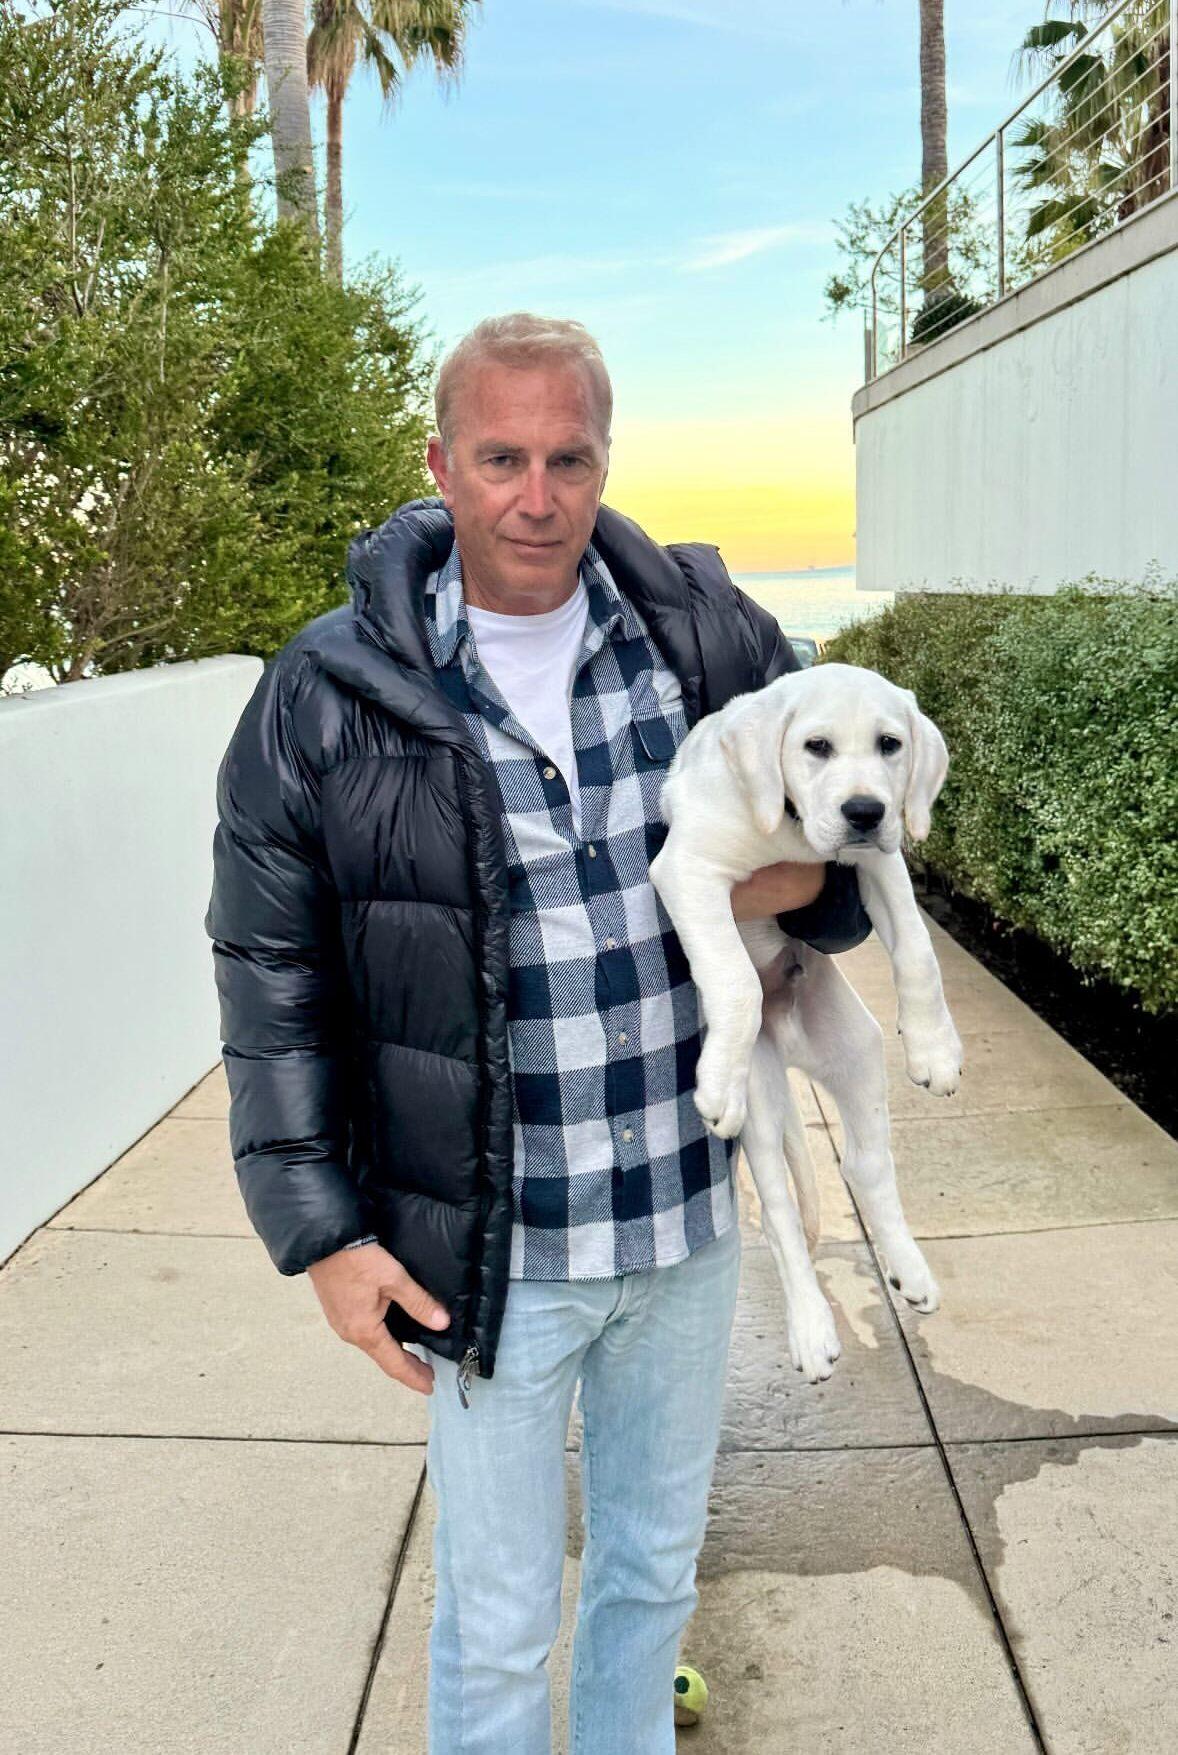 Kevin Costner Posts Cute Pics Of New Puppy Amid Ex-Wife's Romance With His Banker Friend